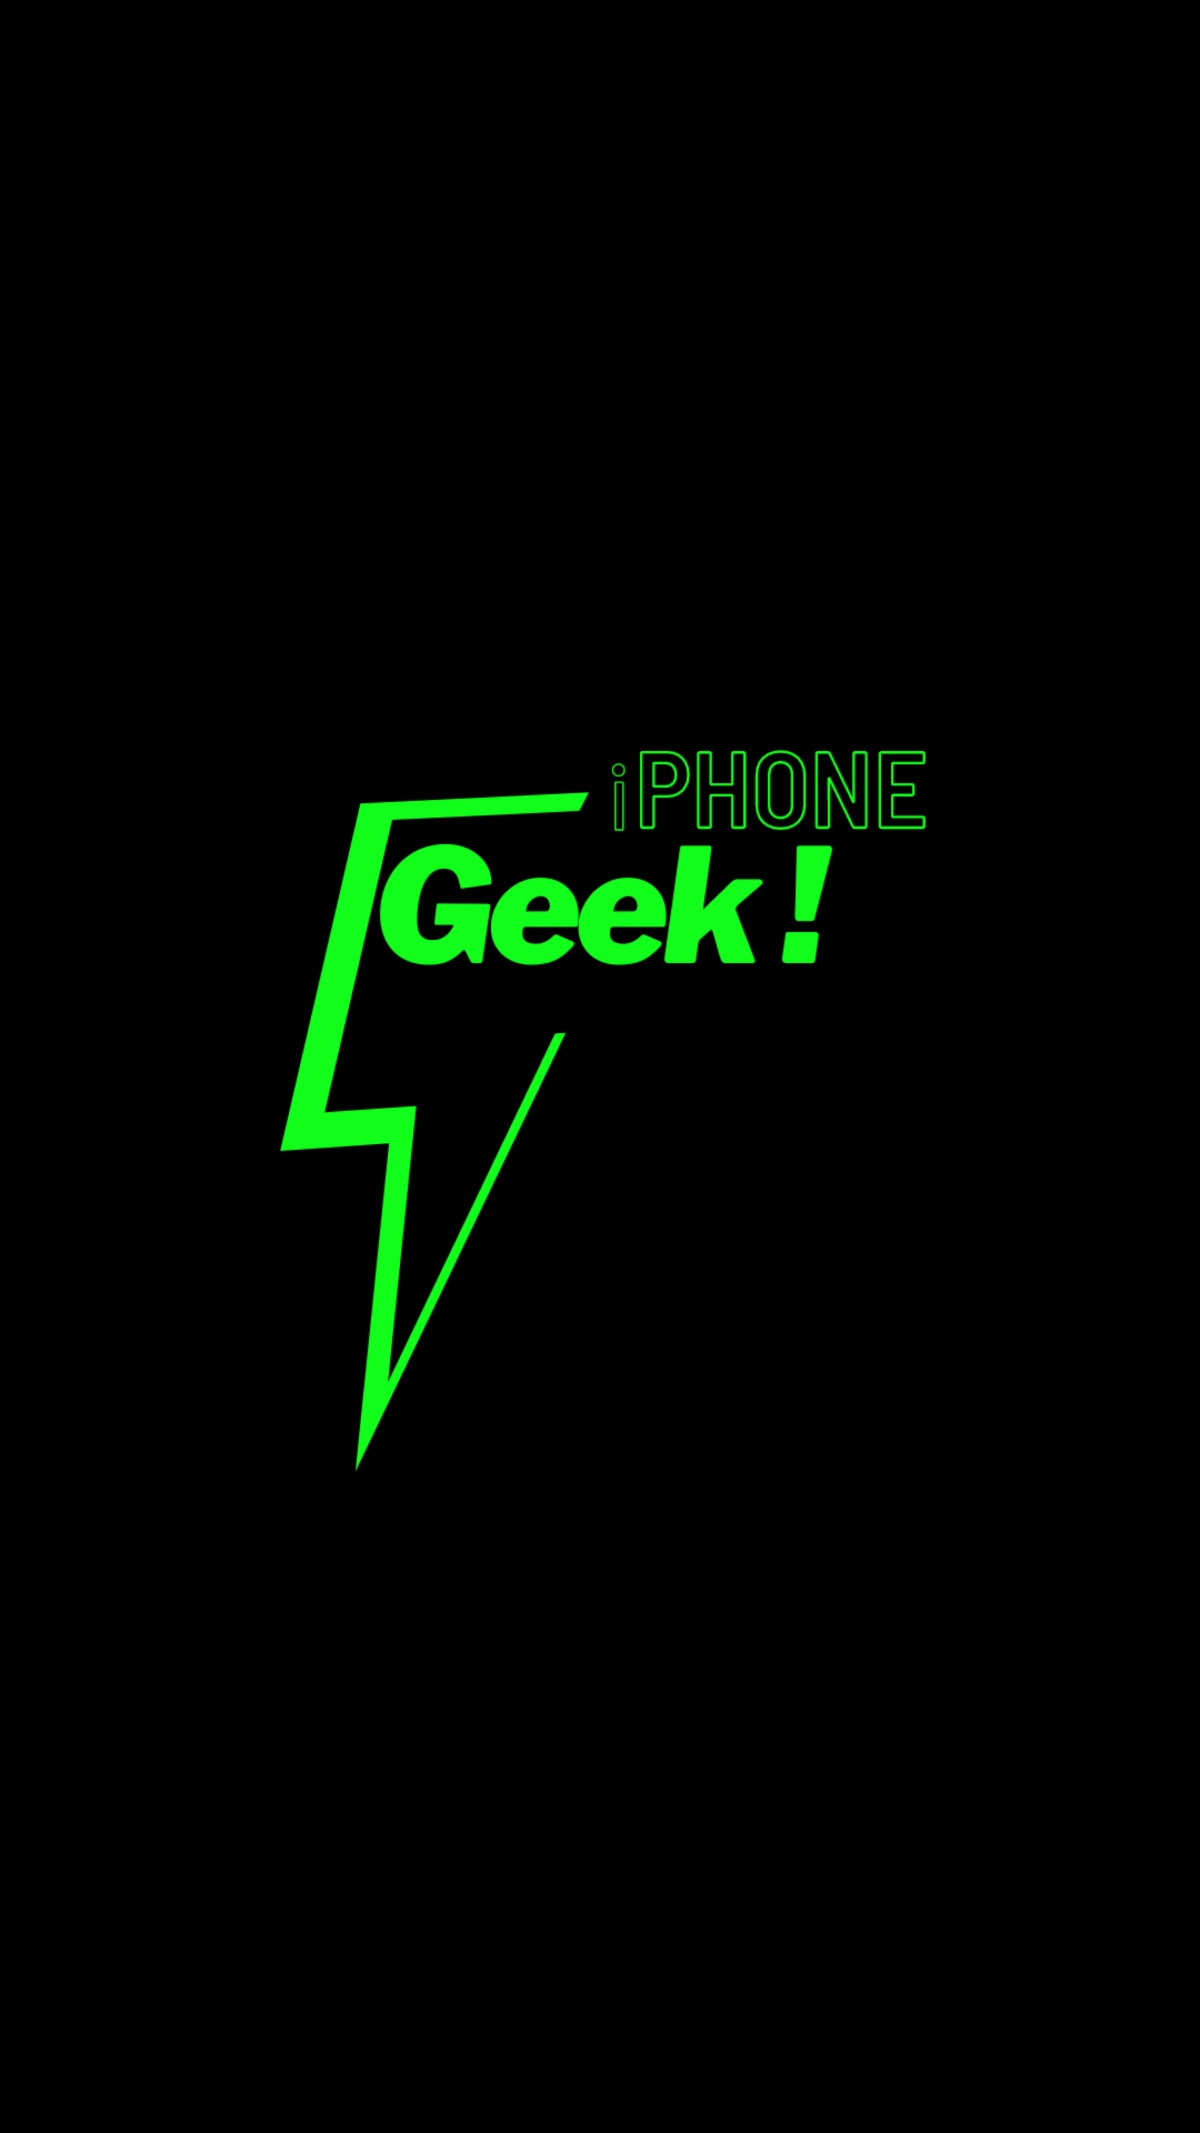 For The IPhone Geeks wallpaper for Apple iPhone, Mac, iPad and more